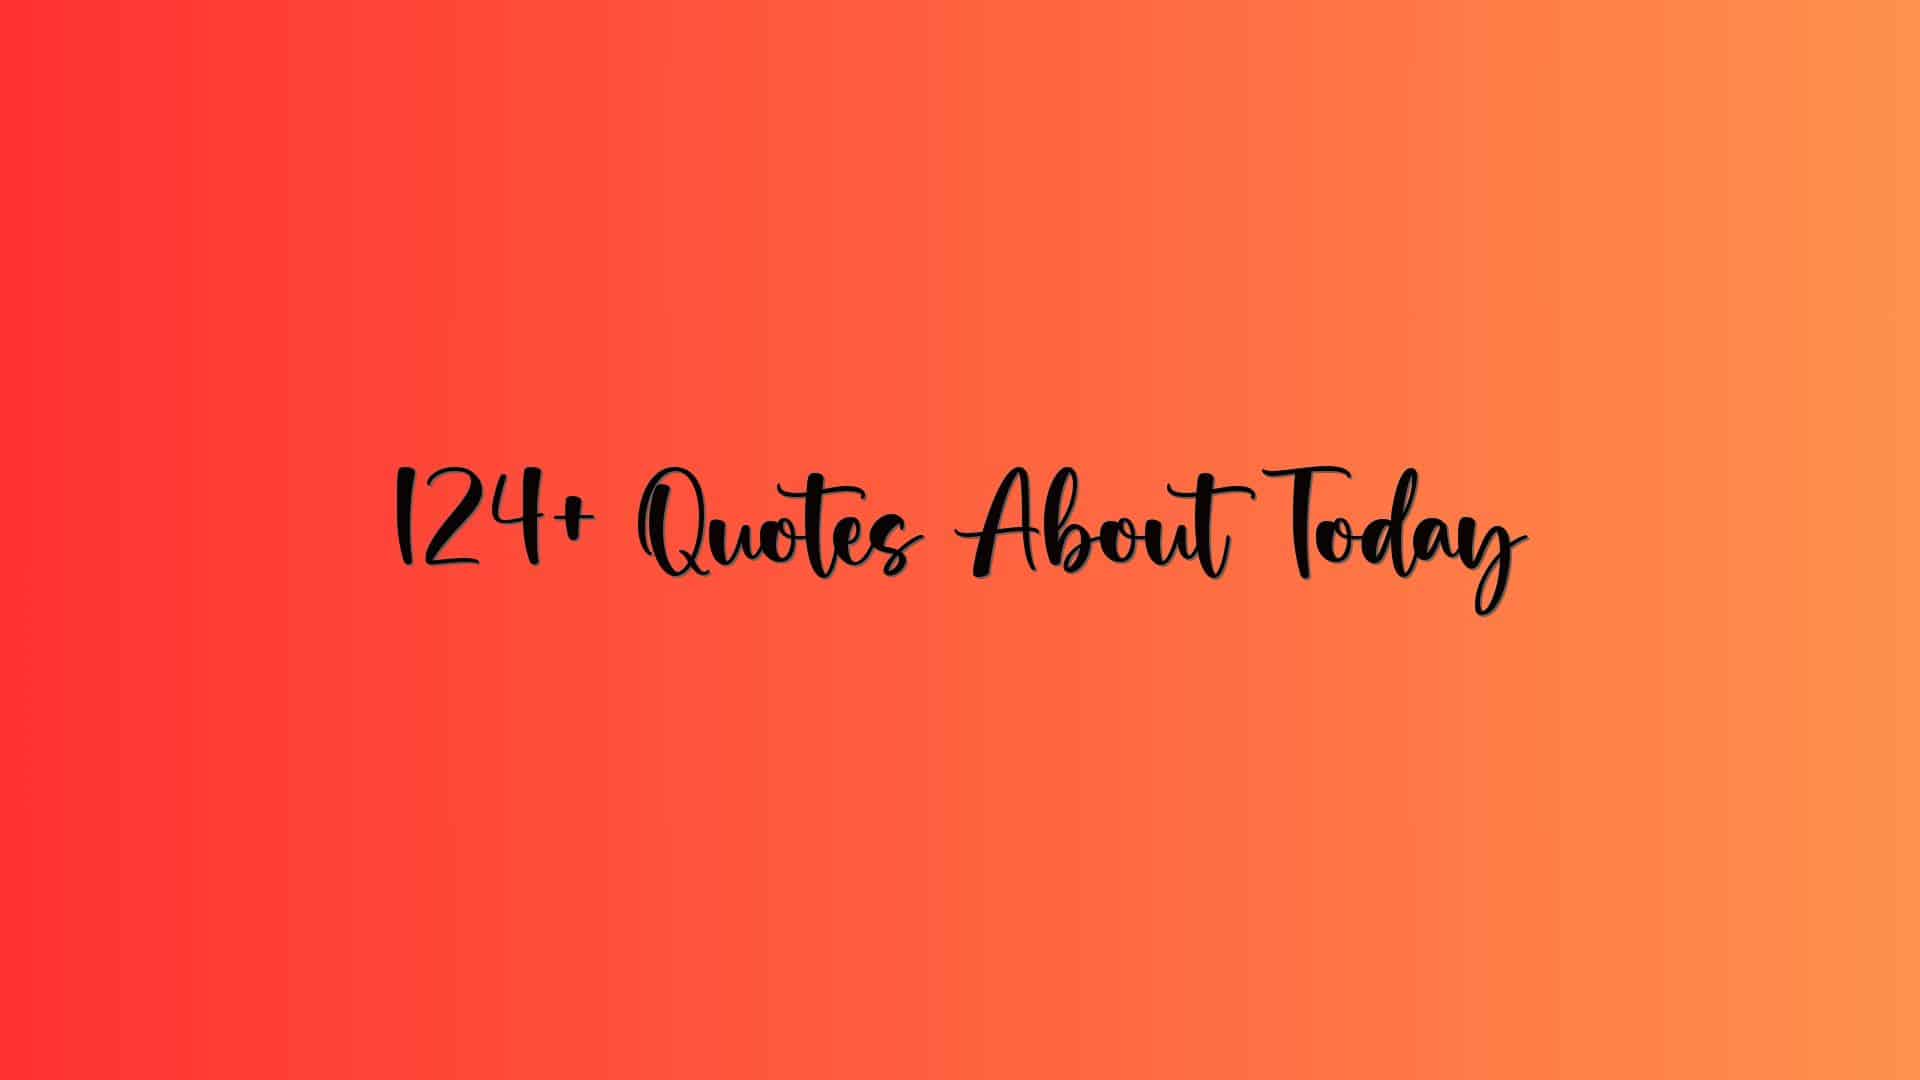 124+ Quotes About Today